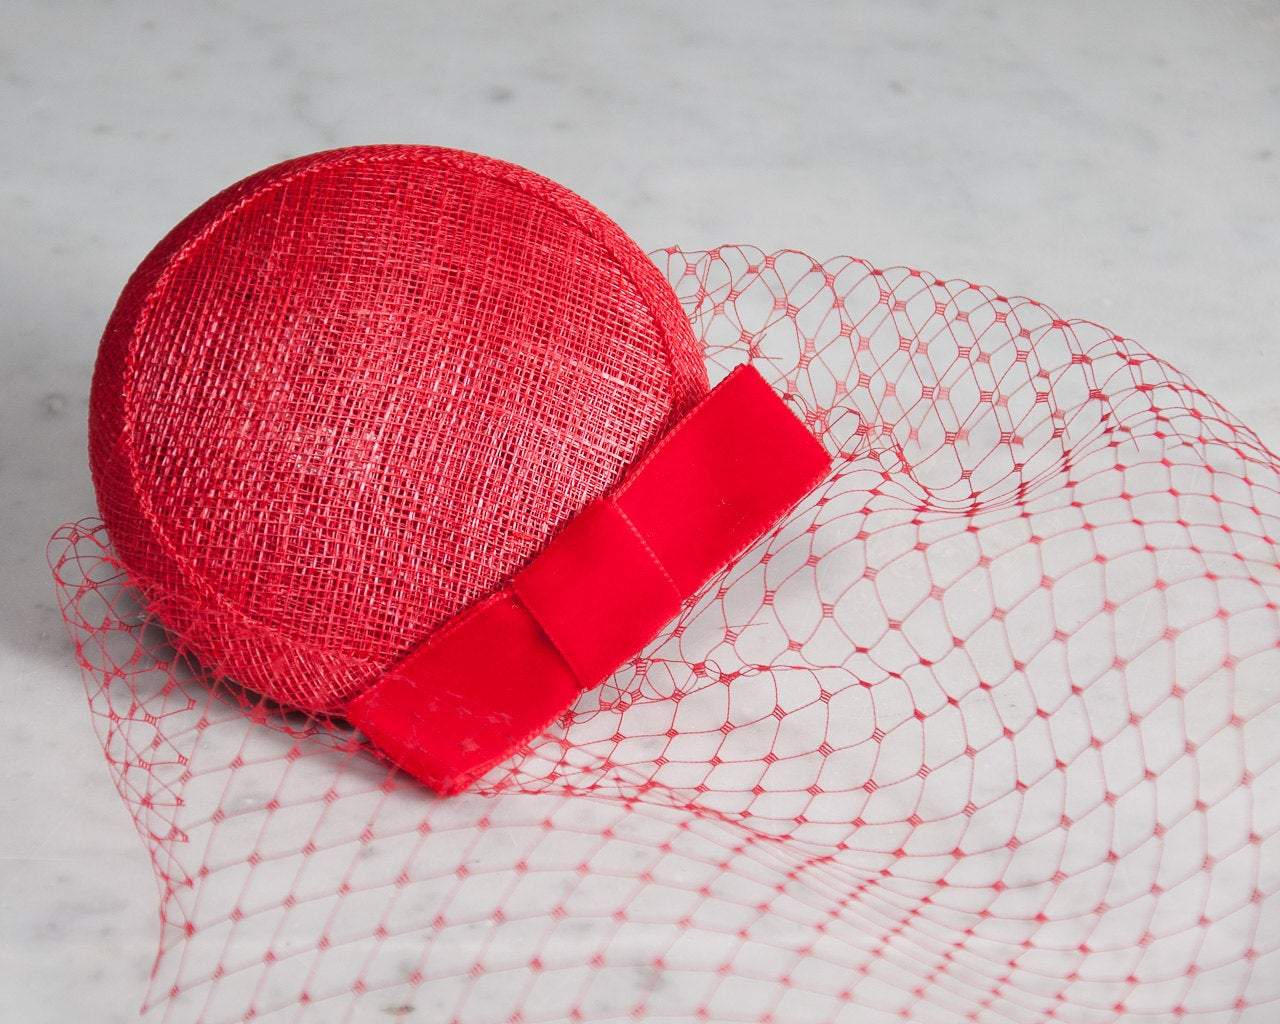 BIRDCAGE - VEIL FASCINATOR WITH A VEIL IN VALENTINES RED © Seegang Berlin